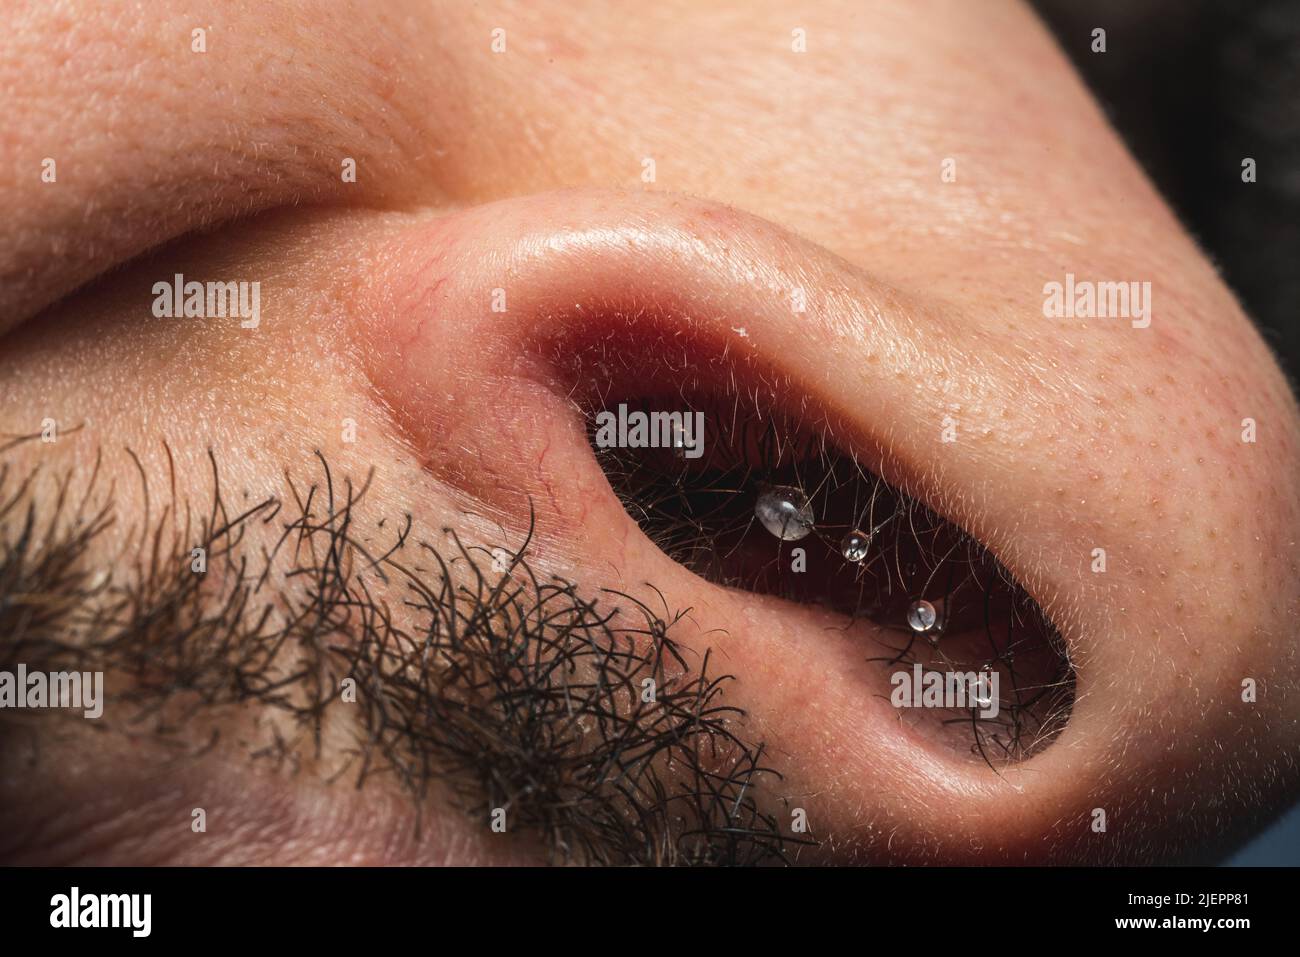 A detail shot of frozen water droplets in a nose at winter. Stock Photo